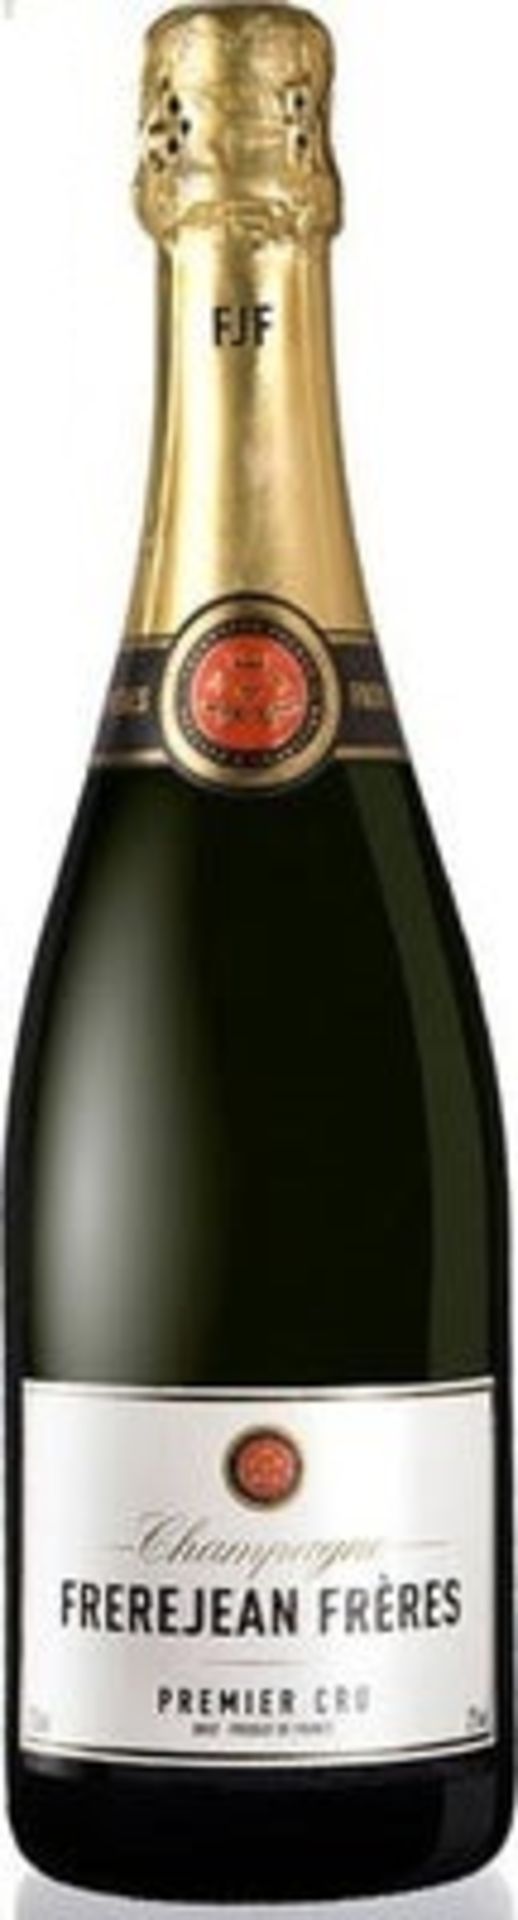 Frerejean Freres Premier Cru Brut, Champagne 2007 ( Bid Is For 1x Bottle Option To Purchase More)